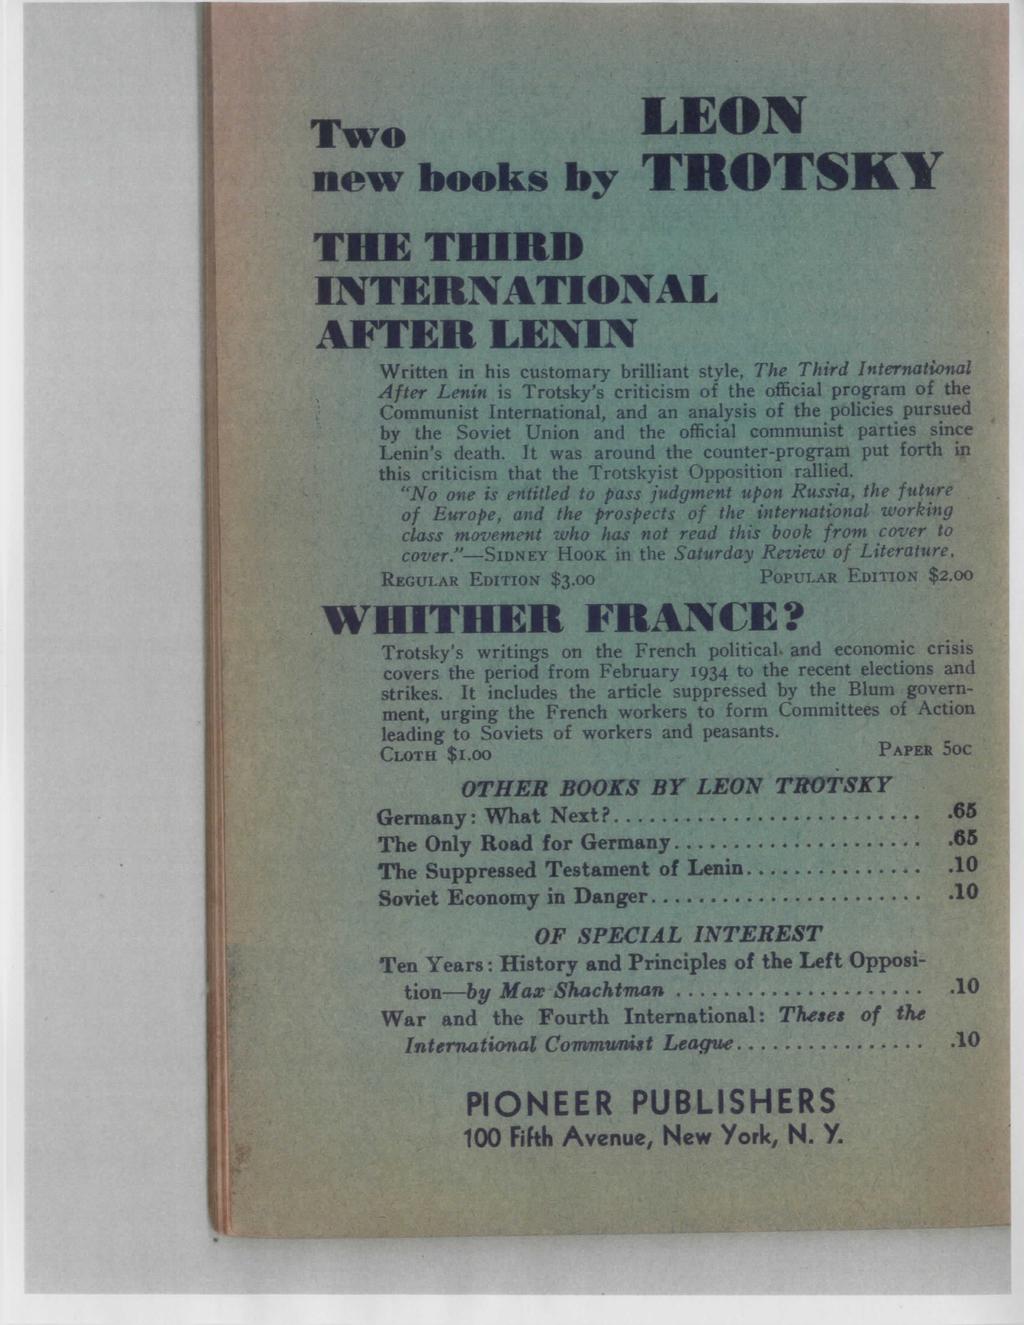 Two new books by TROTSKY THE THIRD INTERNATIONAL AFTER LENIN Written in his customary brilliant style, The Third International After Lenin is Trotsky's criticism of the official program of the